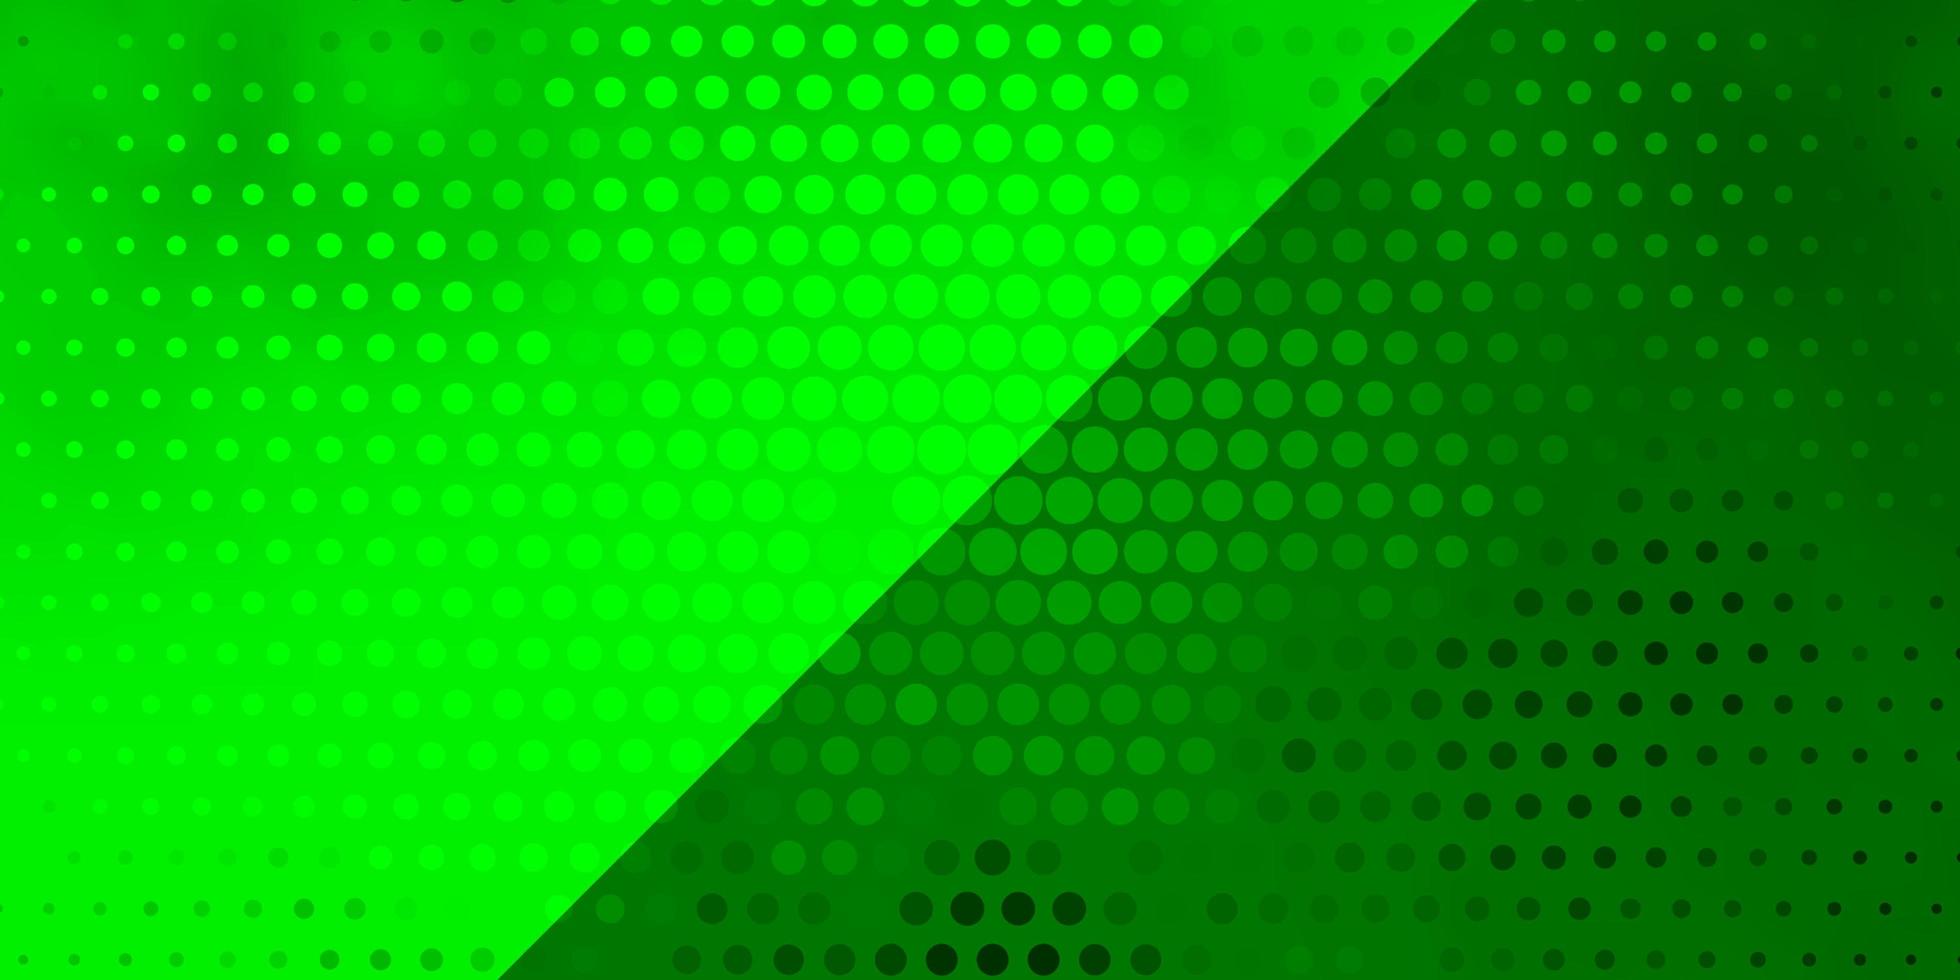 Light Green vector pattern with circles.